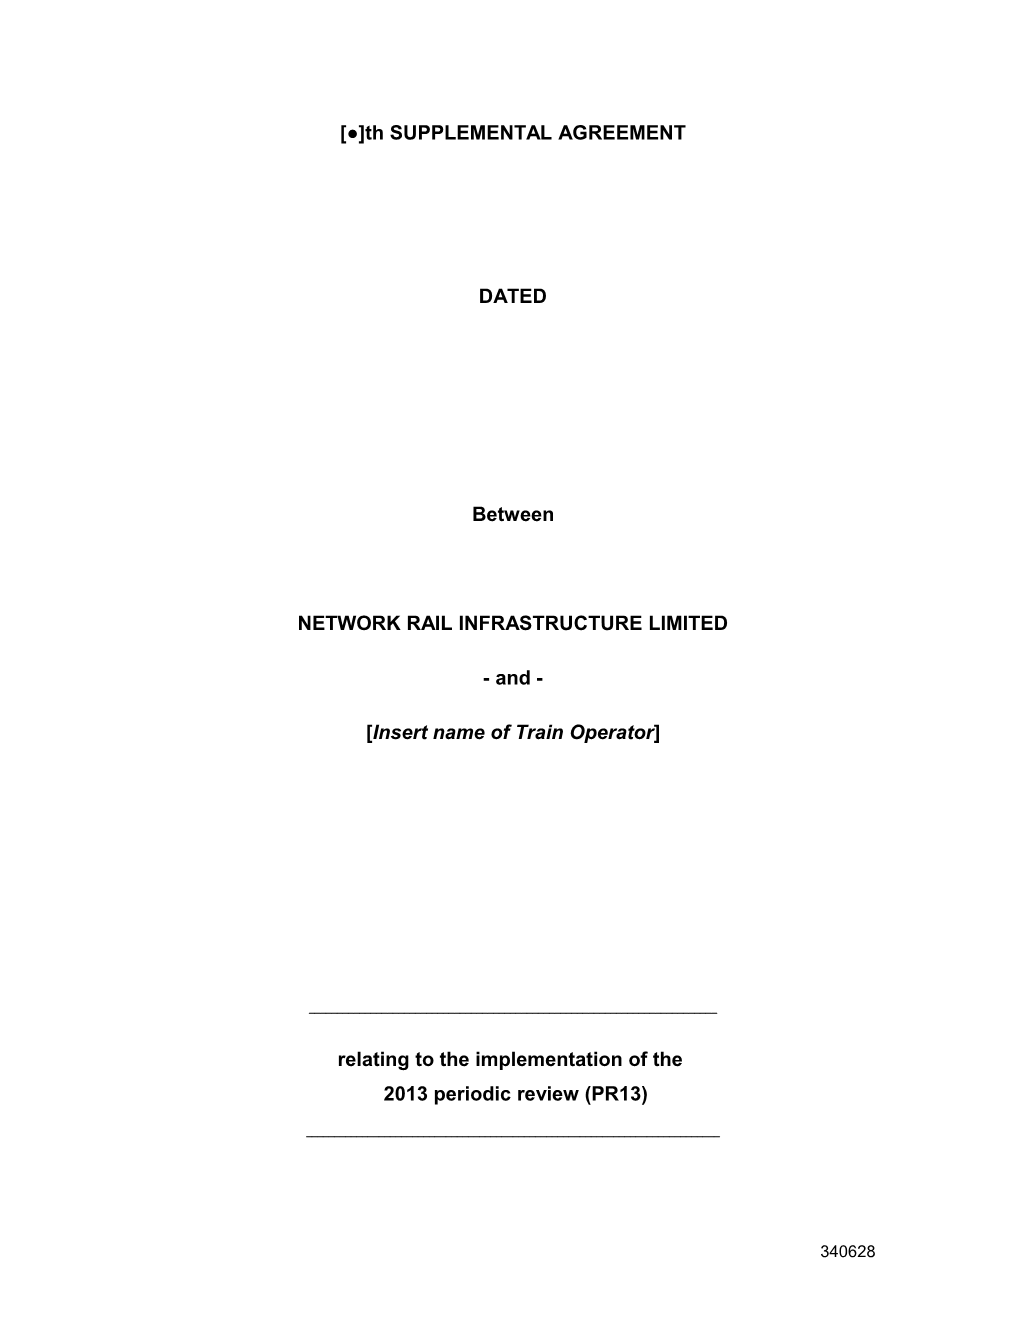 PR13 Franchised Operator Template Supplemental Agreement - 18 March 2014